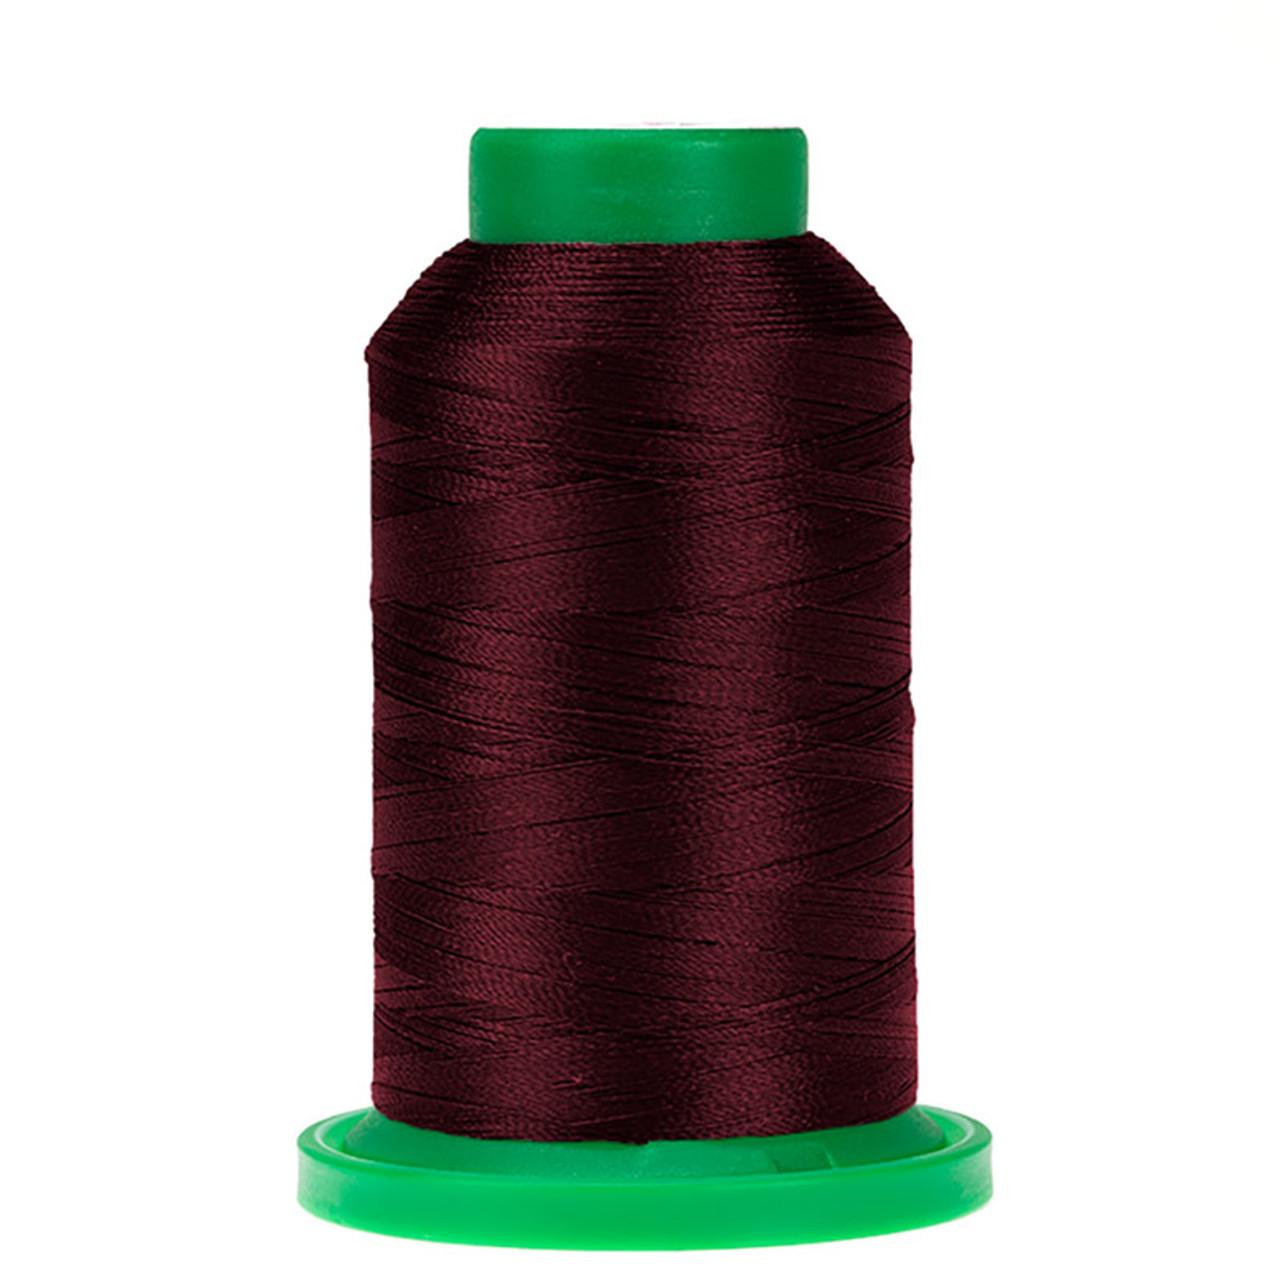 Thread - Isacord - Beet Red - 2922-2115 - Special Order